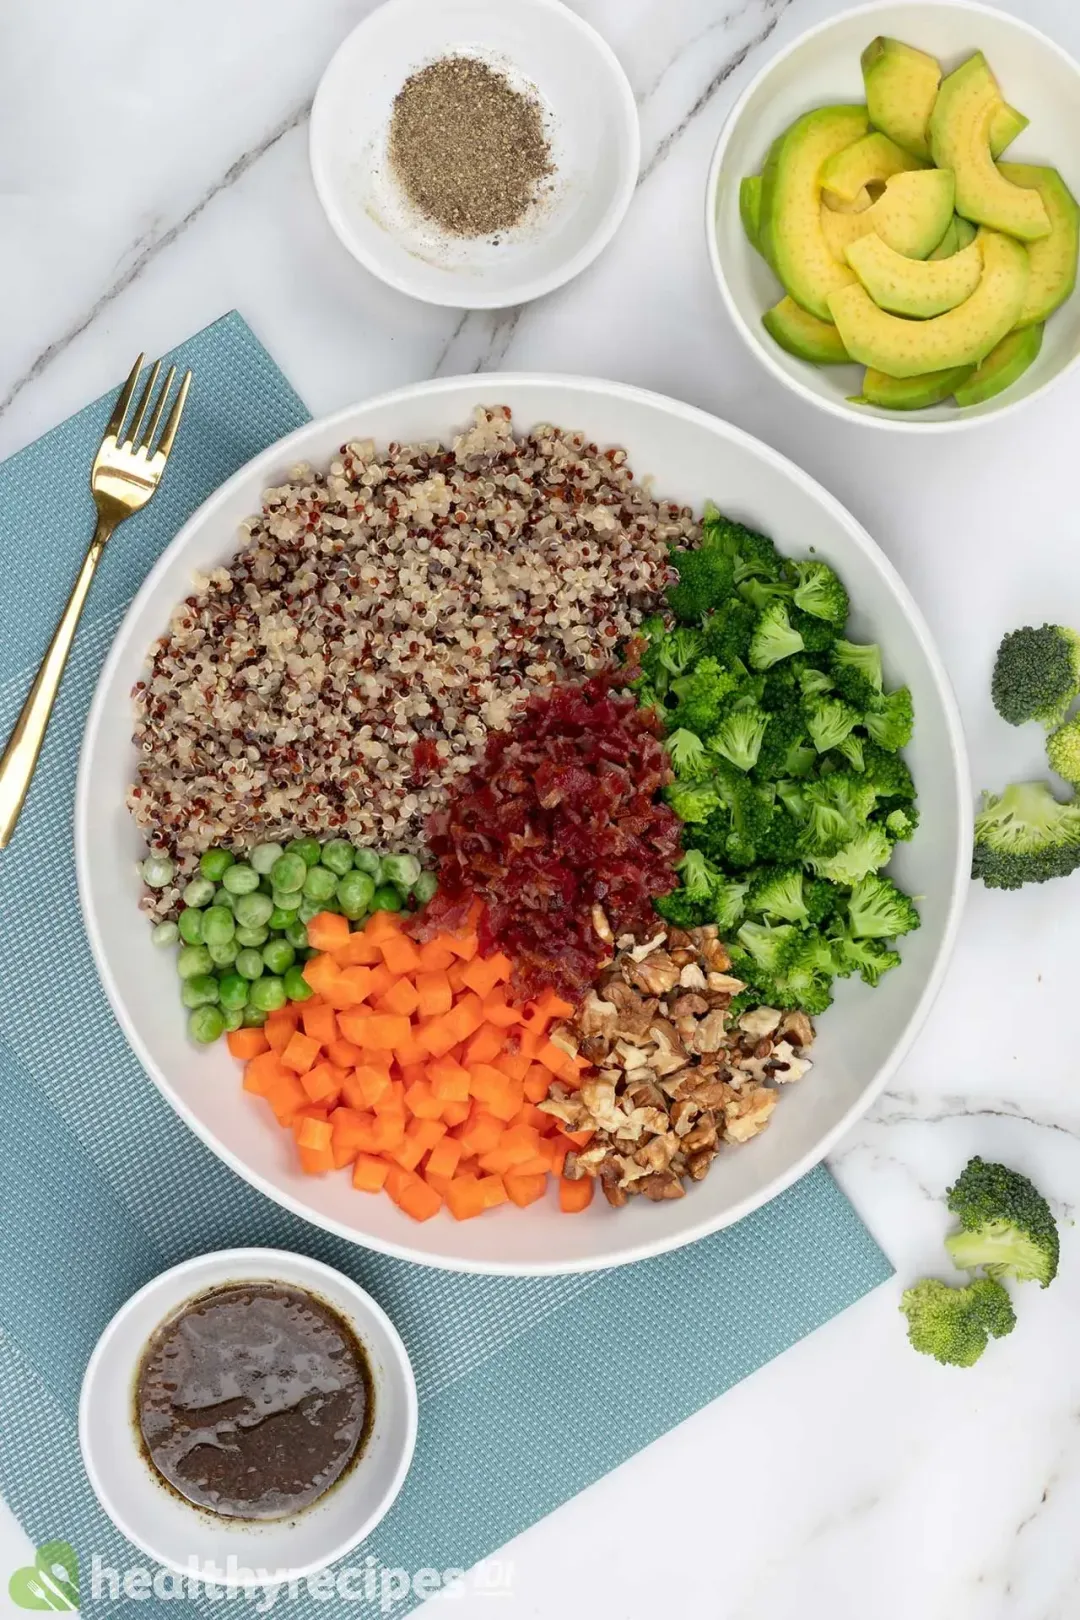 A bowl of quinoa salad with diced vegetables and herbs on top.